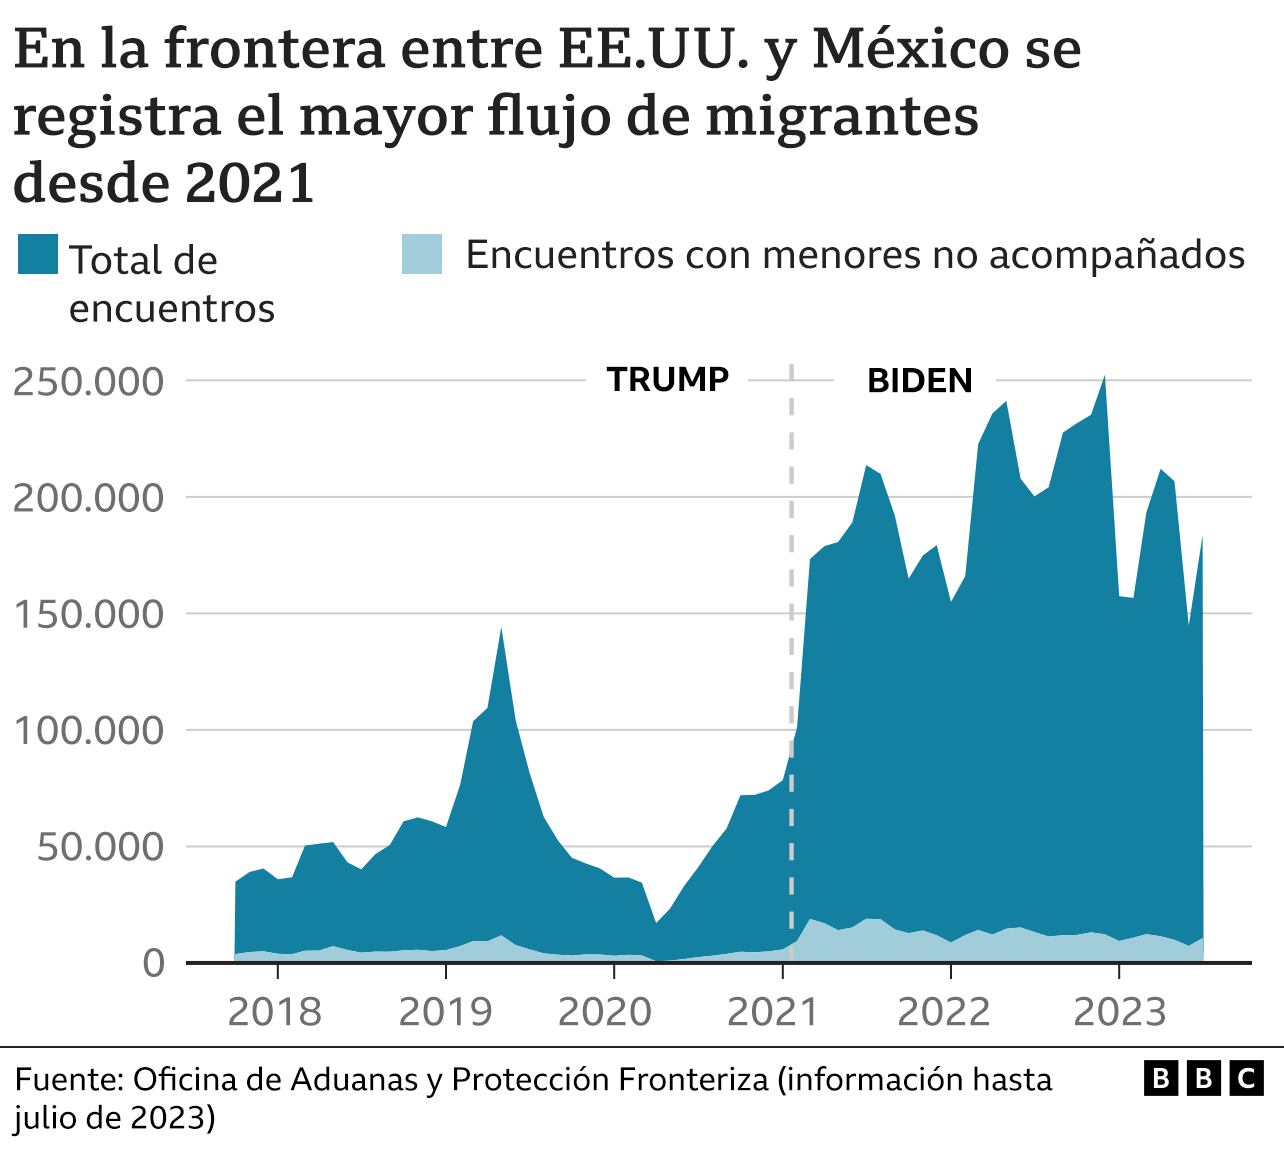 Migrant flow between the US and Mexico